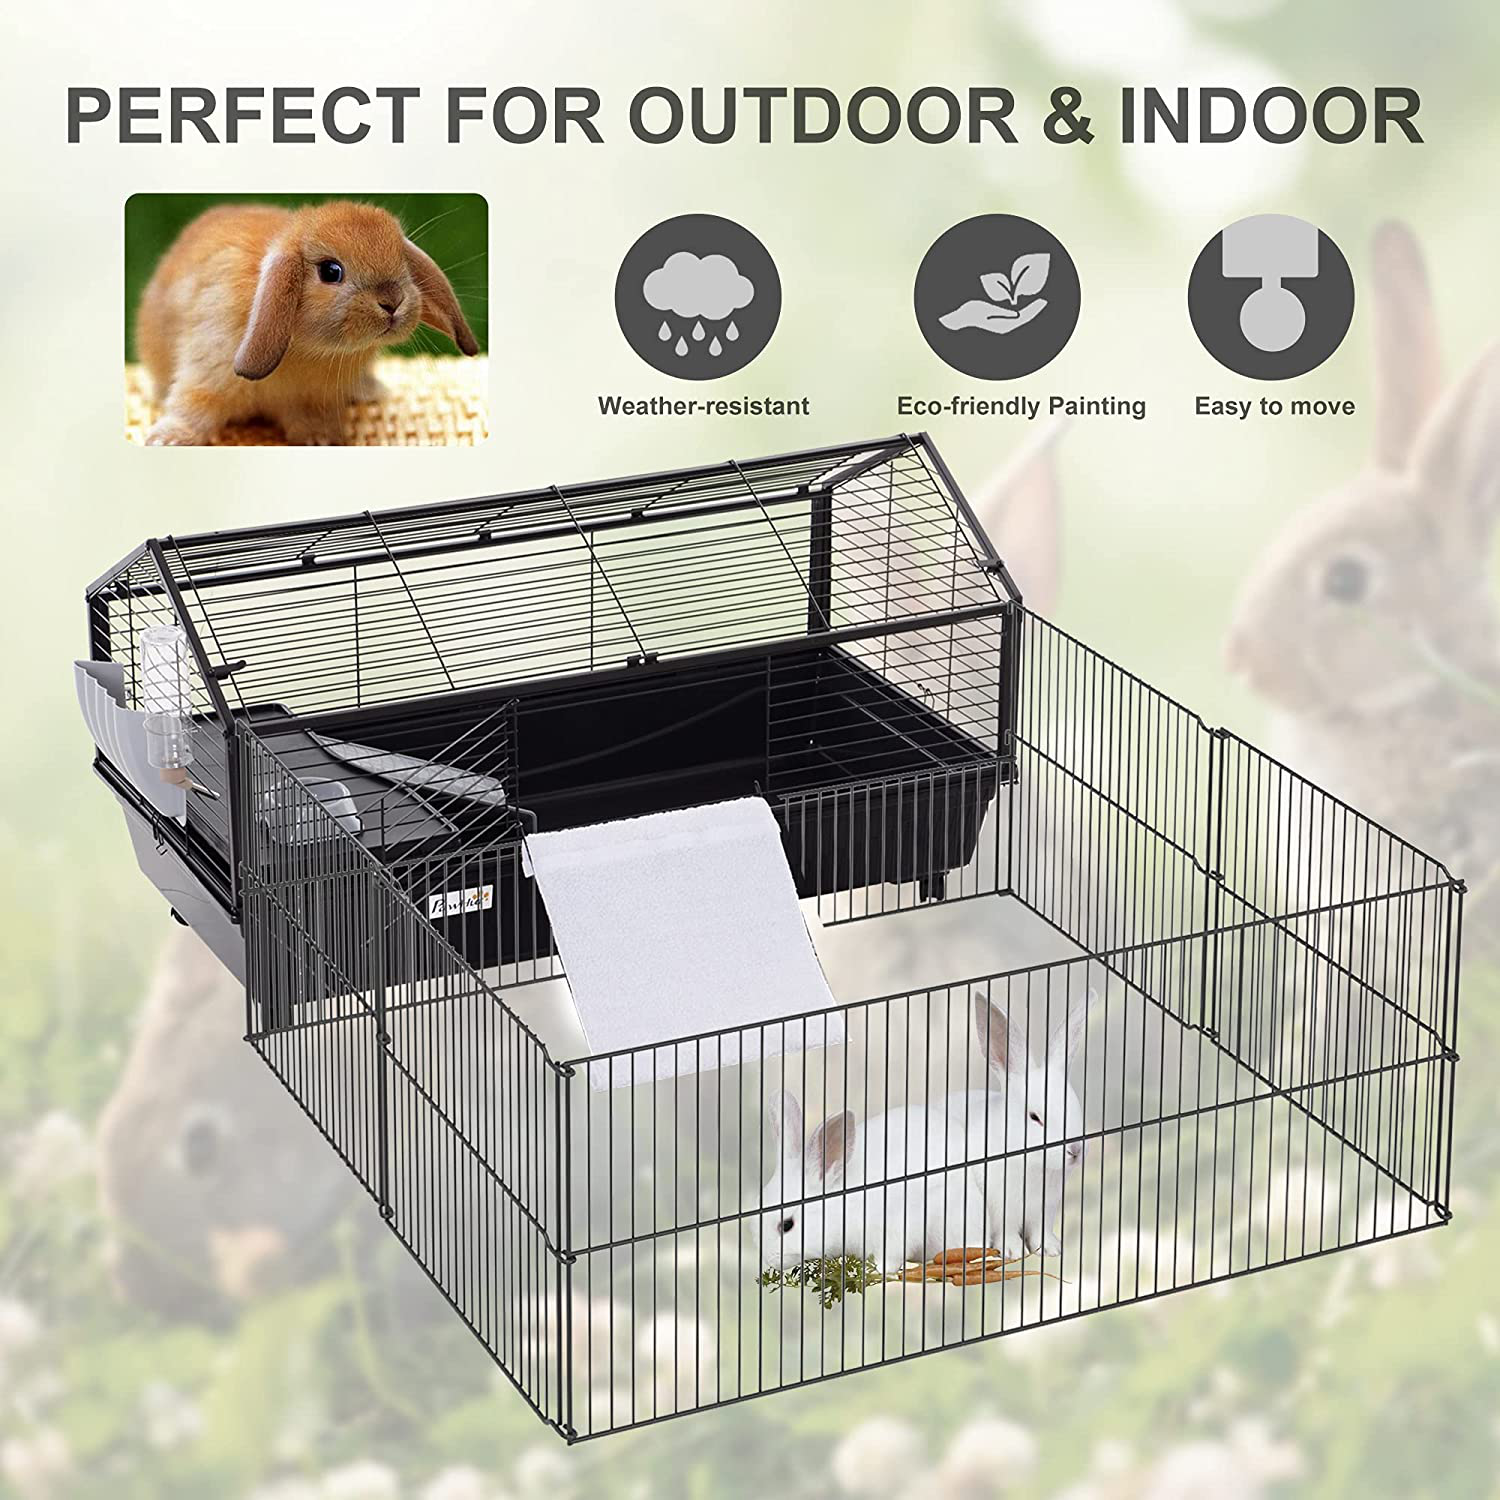 Pawhut Small Animal Cage with Main House and Run for Rabbit, Guinea Pig, Hamster Indoor and Outdoor